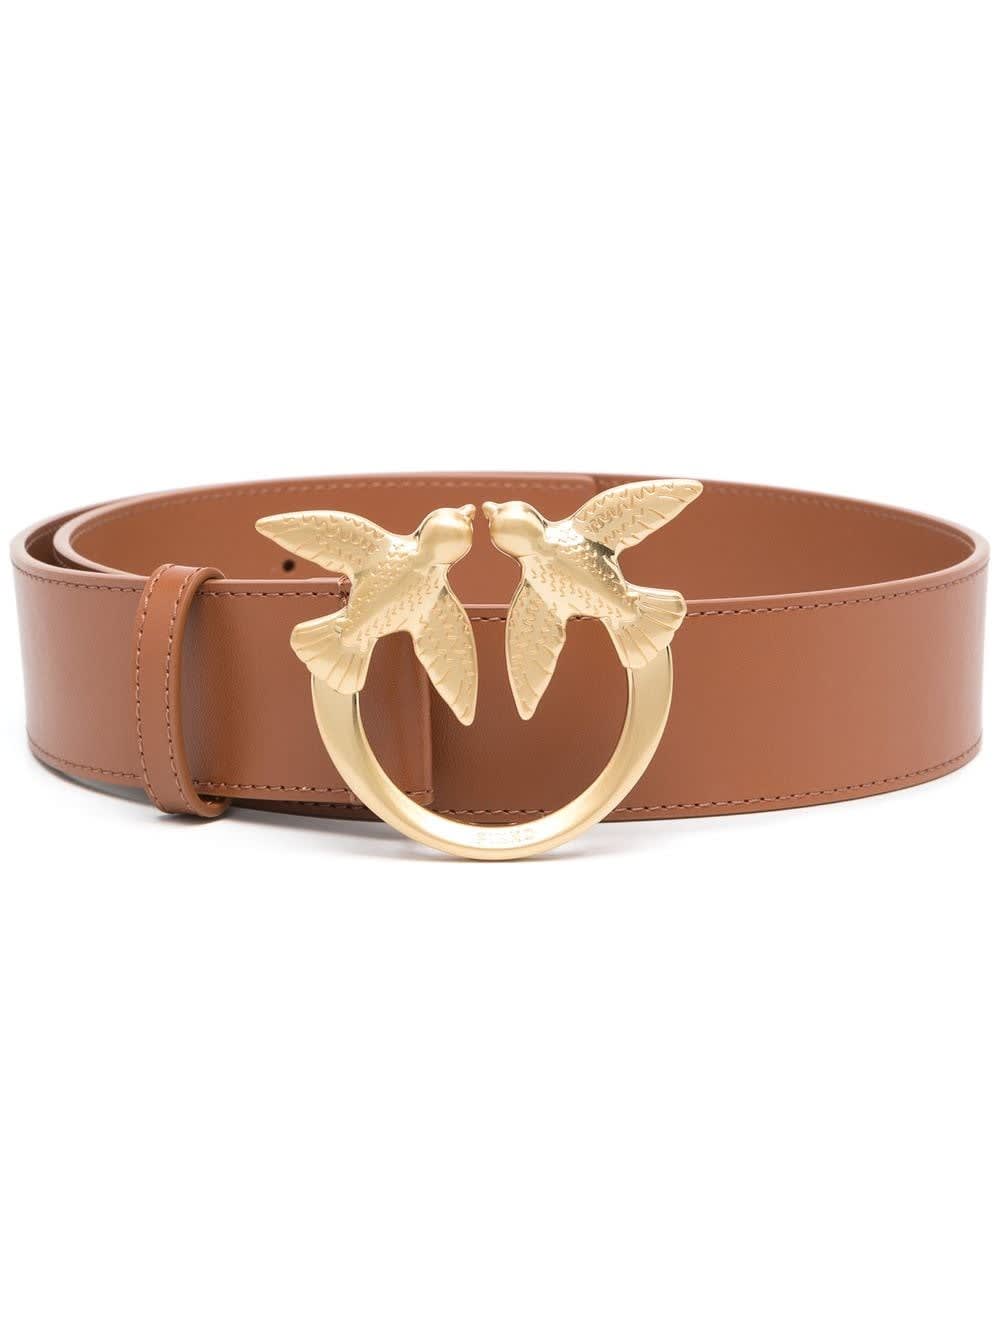 Pinko Love Berry Belt In Beige Leather With Logo Buckle